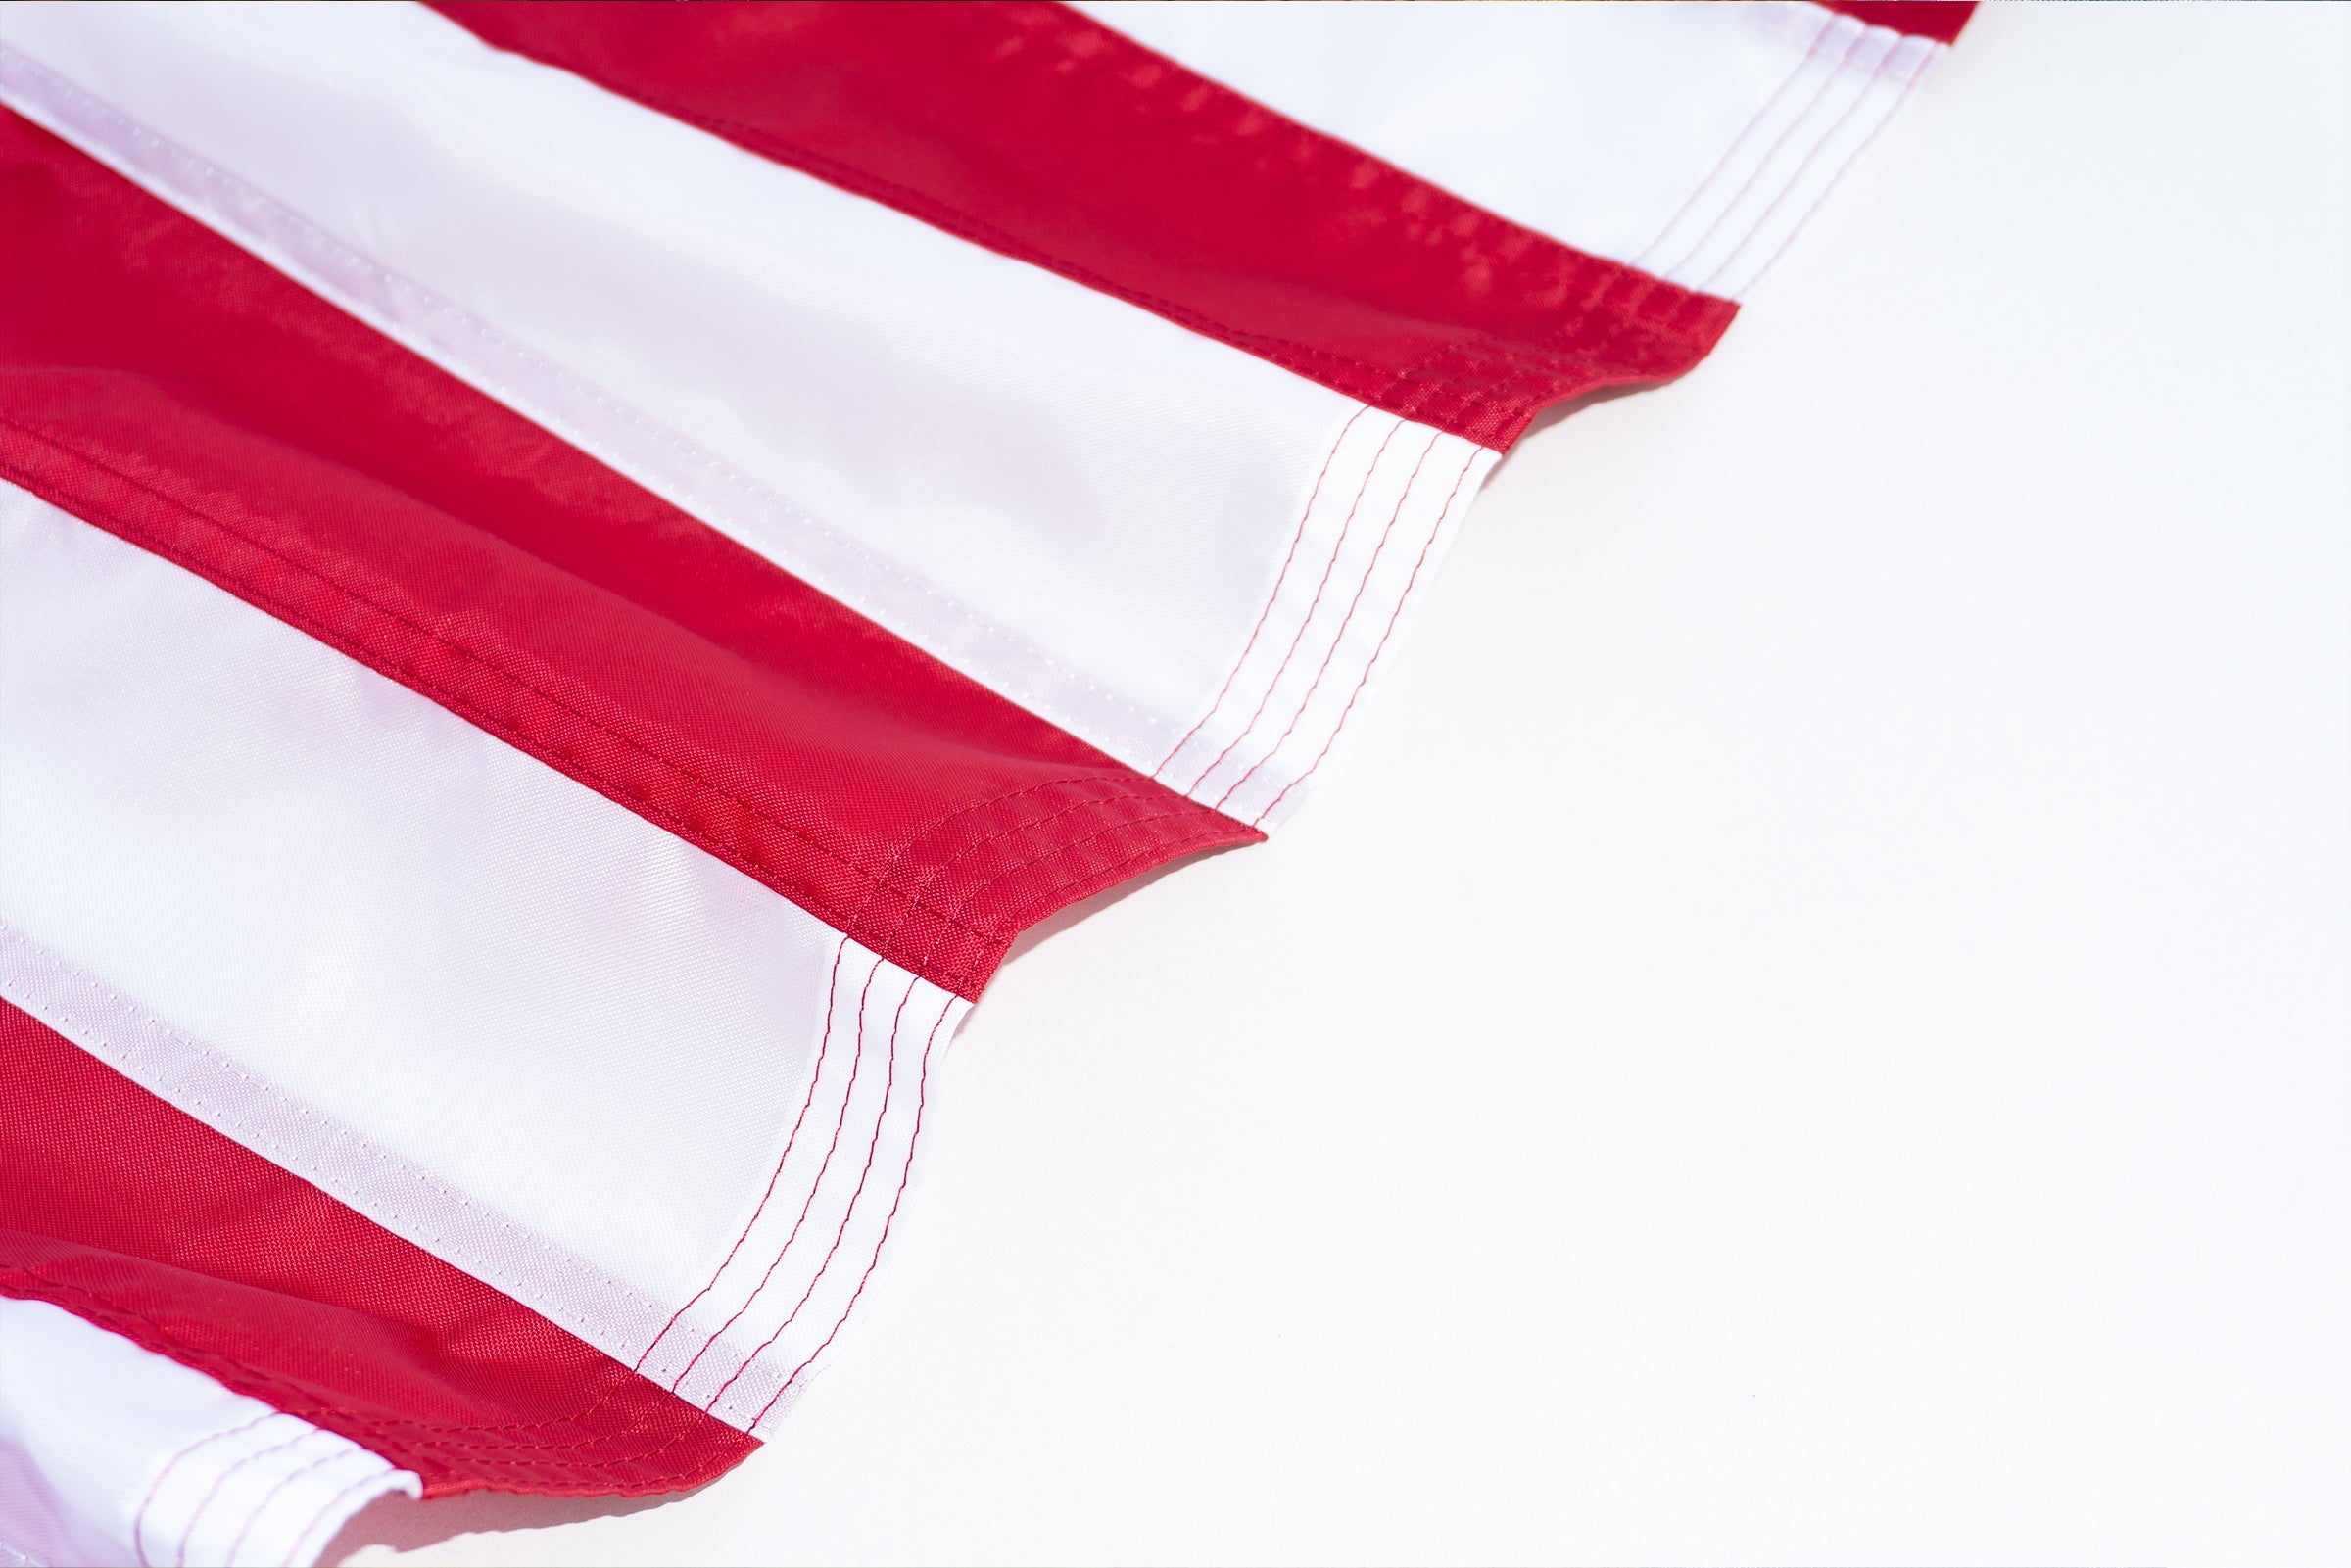 Close-up of red and white striped fabric, likely part of an American Flag, with stitching details visible.